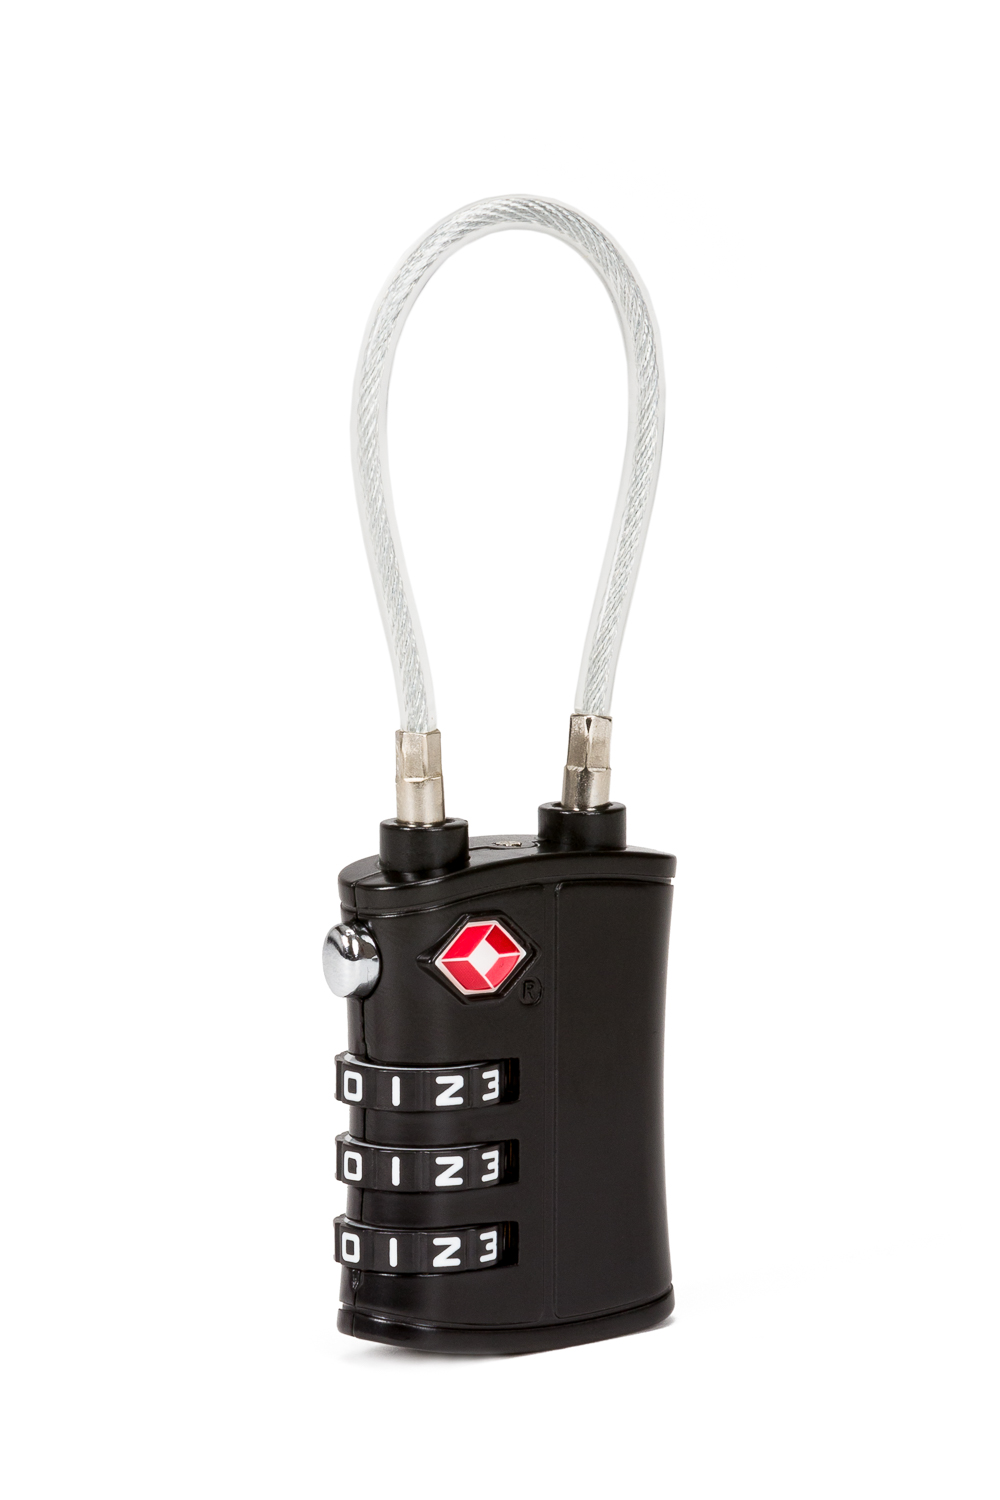 Cable Lock skischloss robust Kohl Castle Combination Lock 140cm long for the bag 